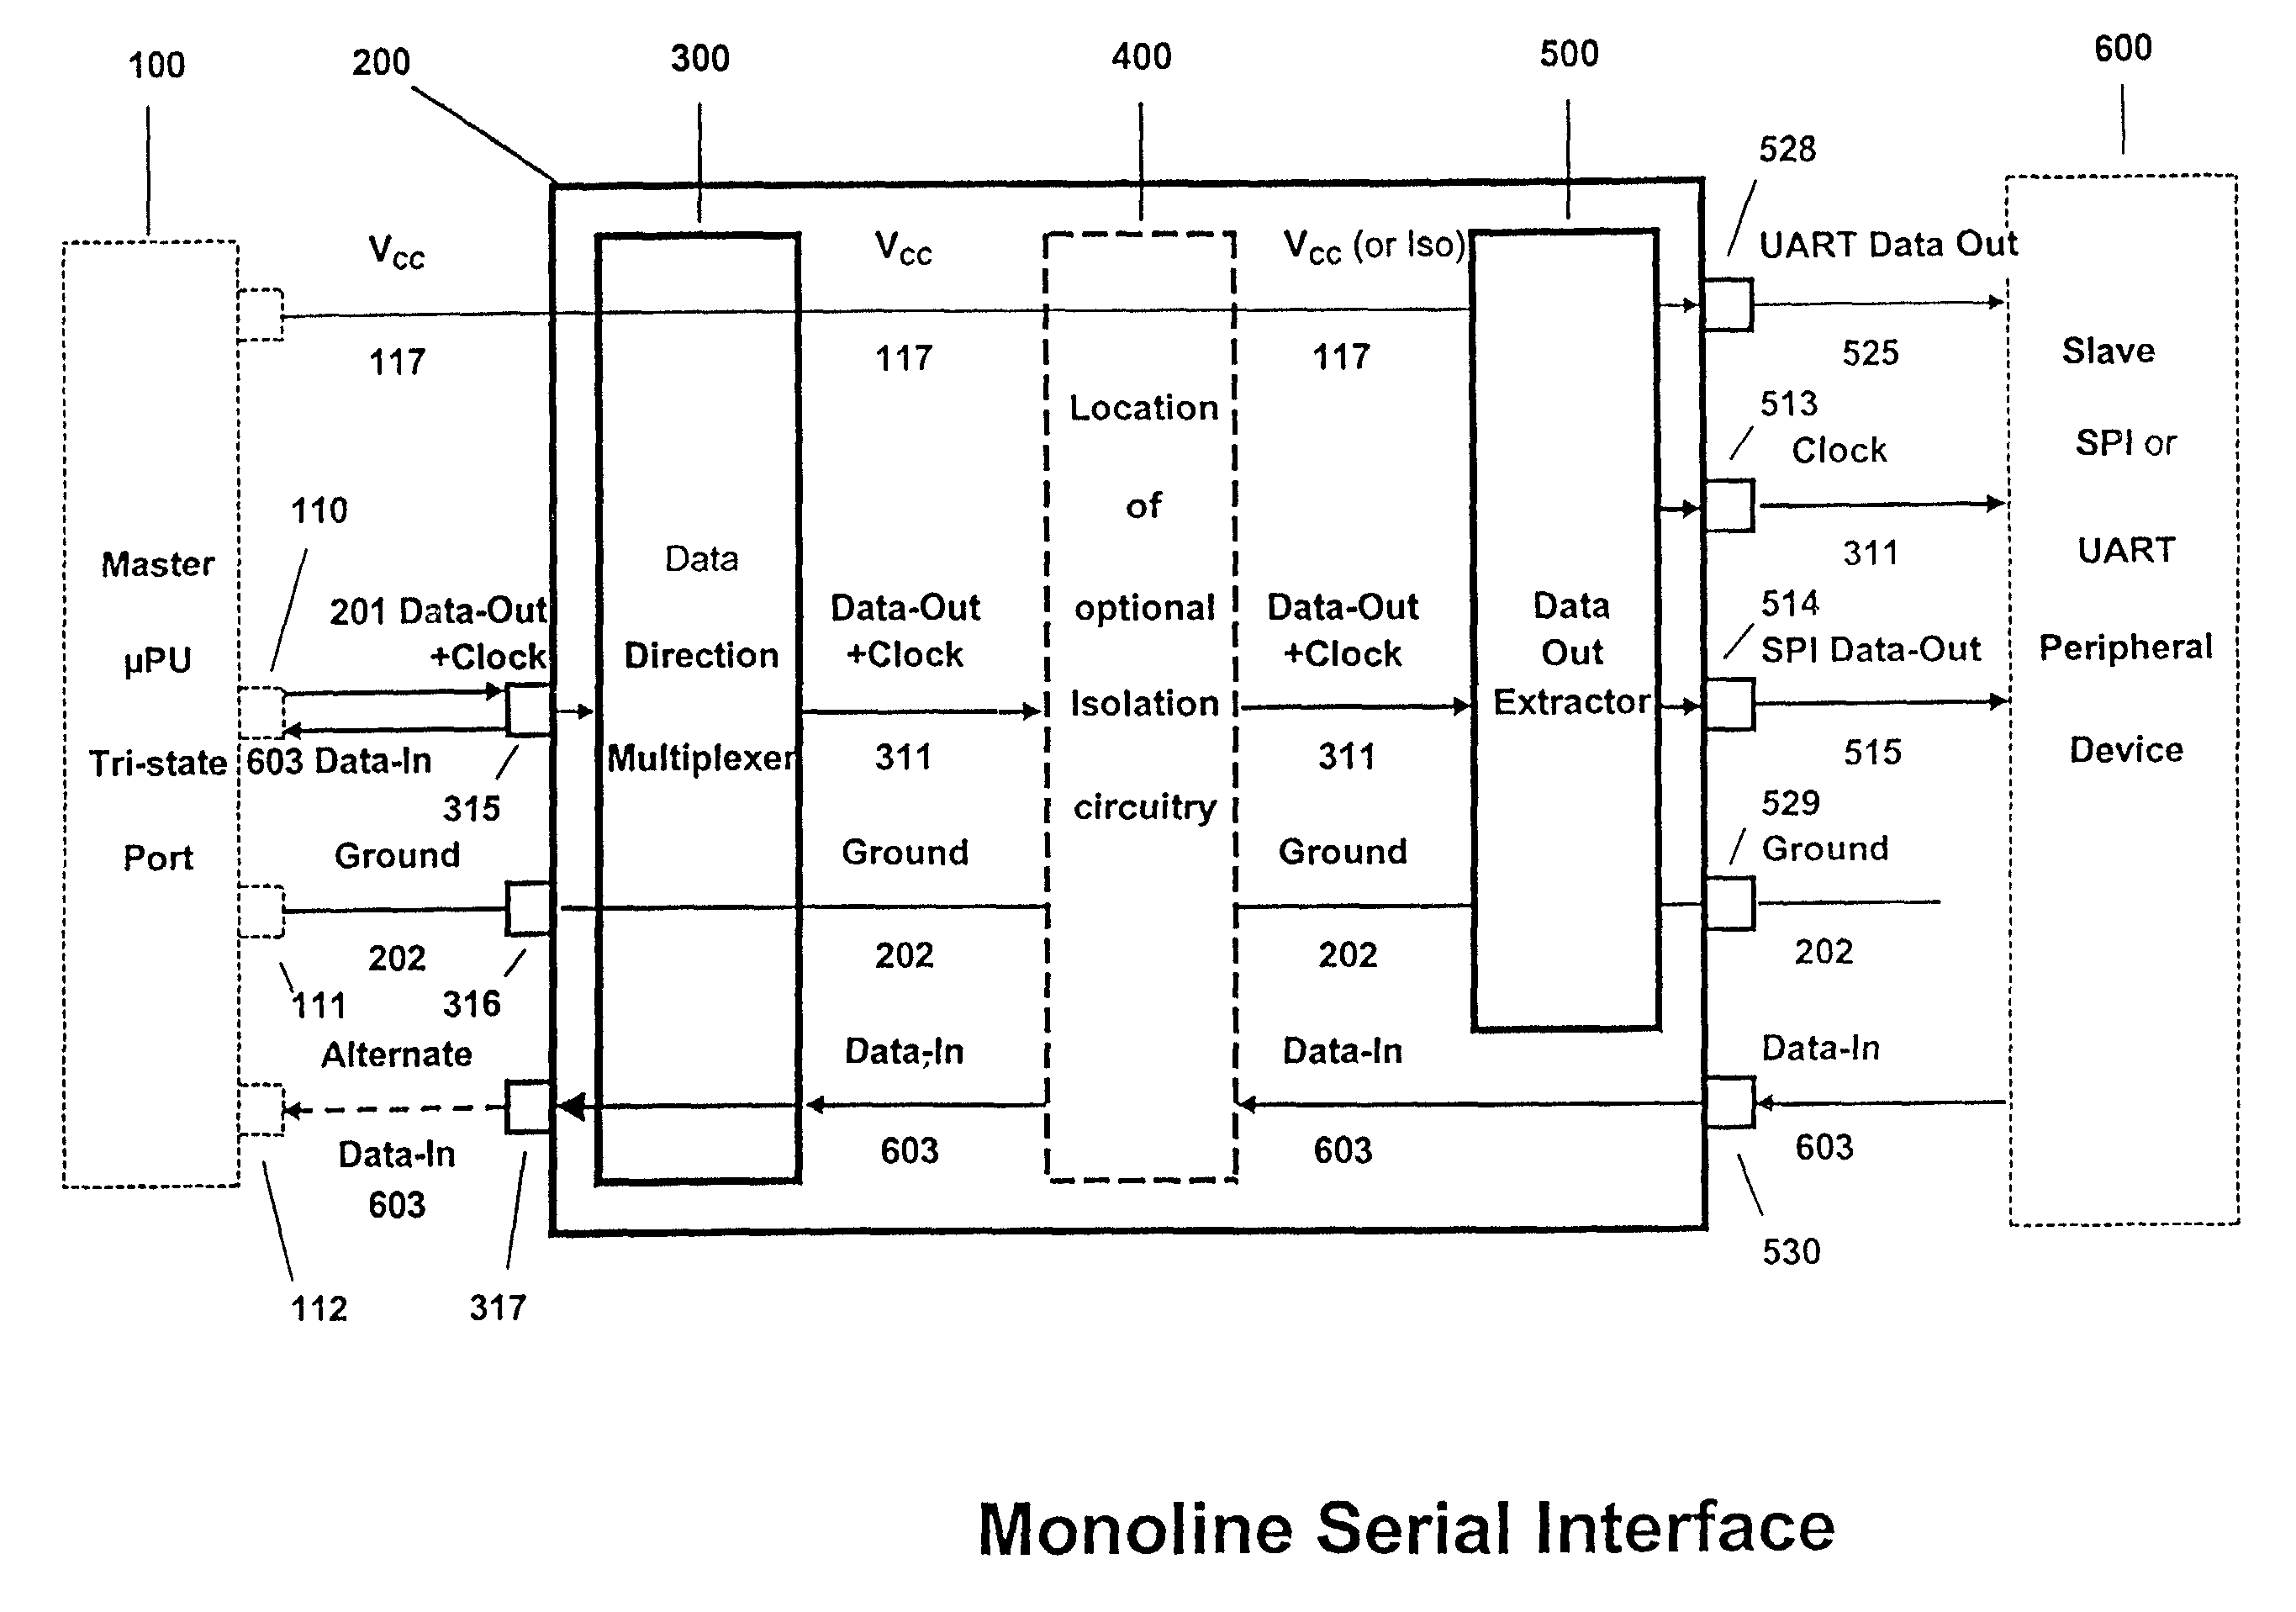 Apparatus, method and signal set for monoline serial interface